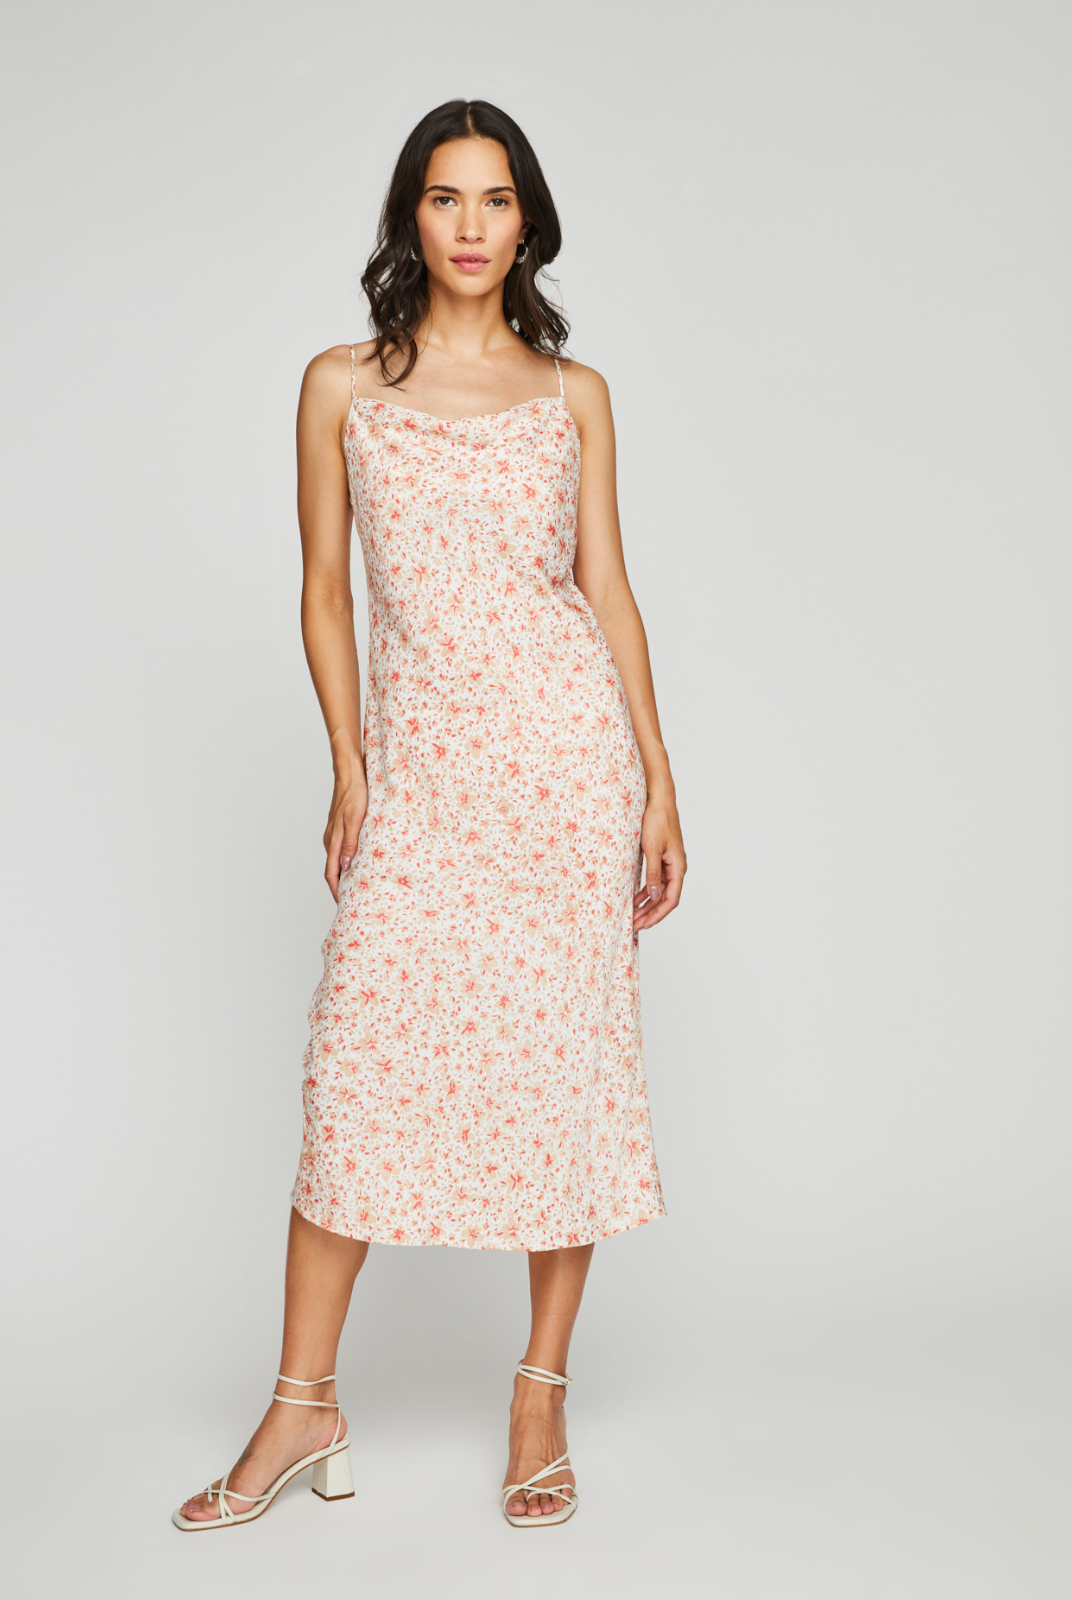 Gentle Fawn Serenity Dress. Satin feel material Midi length Spaghetti straps w/adjusters Fitted in bodice 100% Polyester